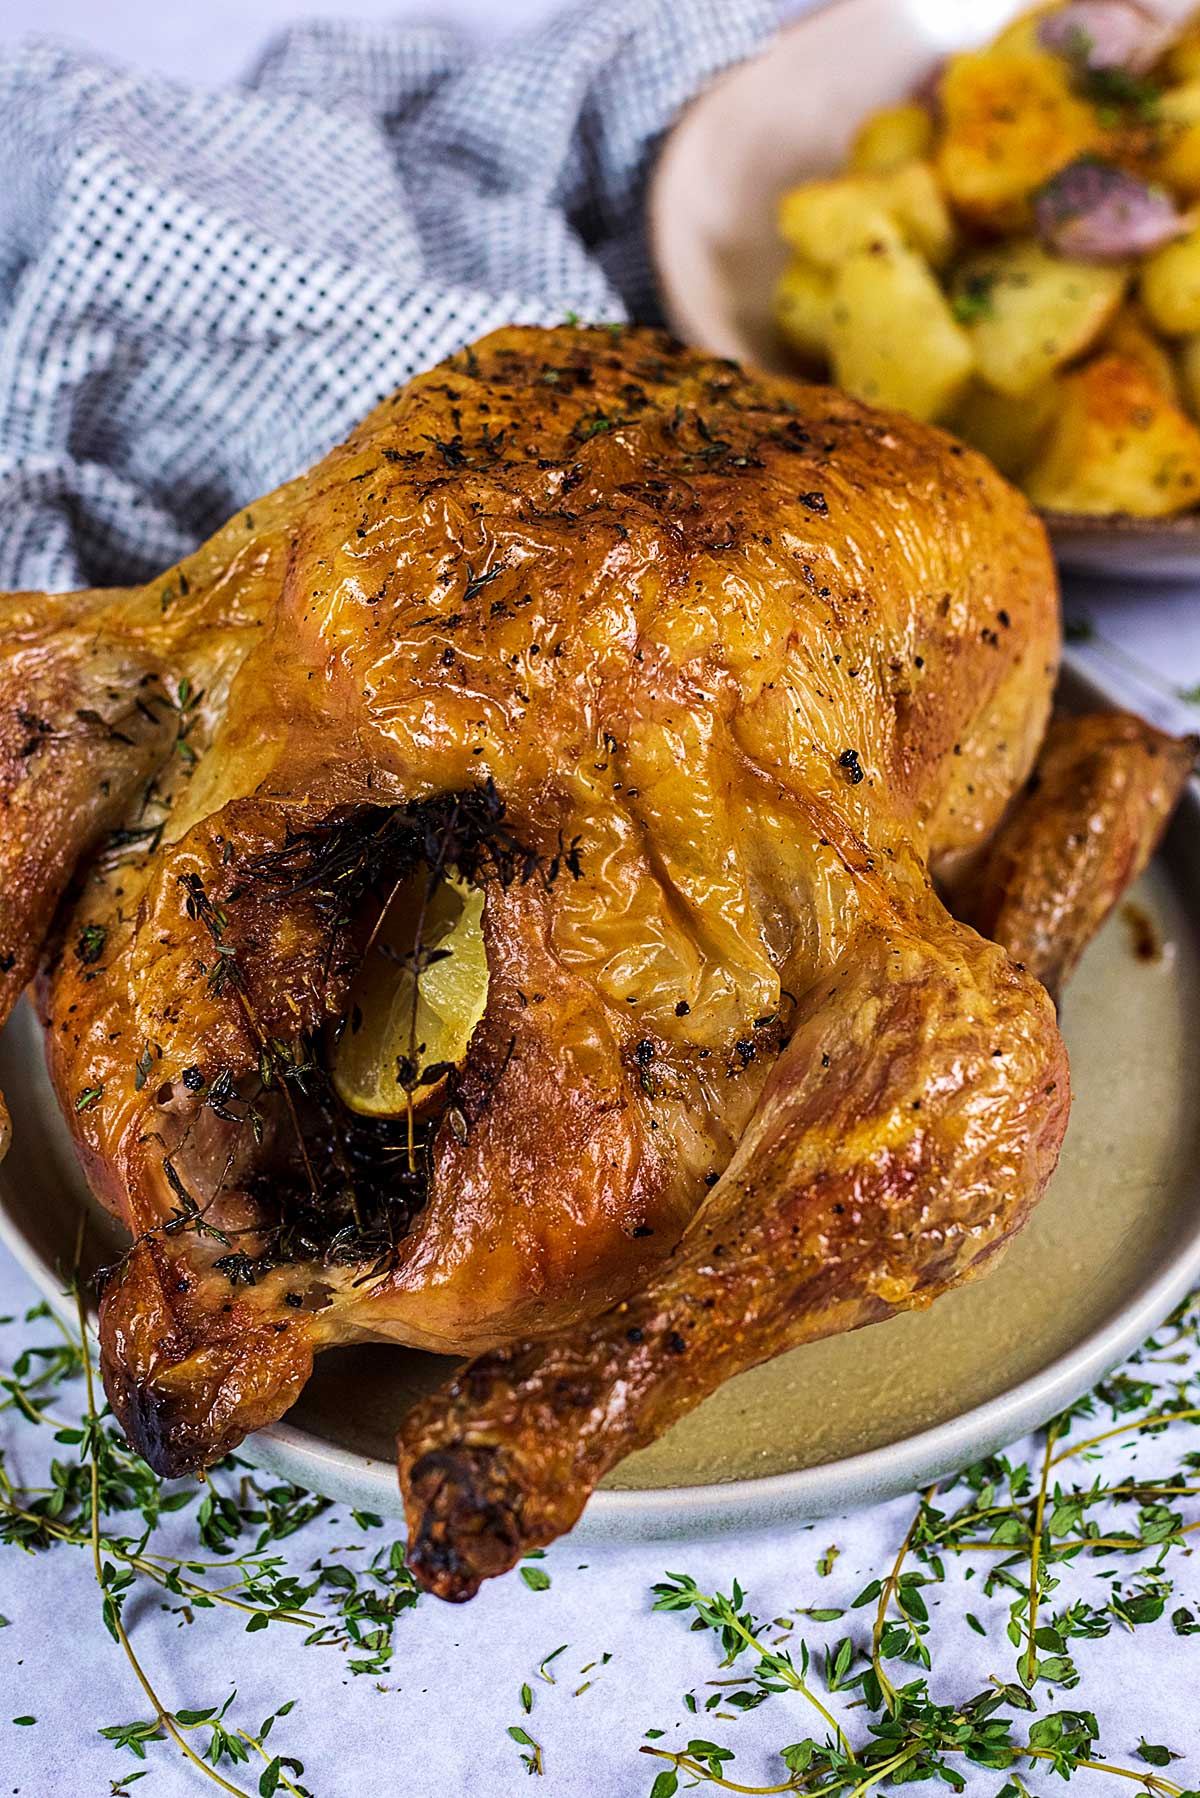 A whole roast chicken on a plate in front of a bowl of roasted potatoes.